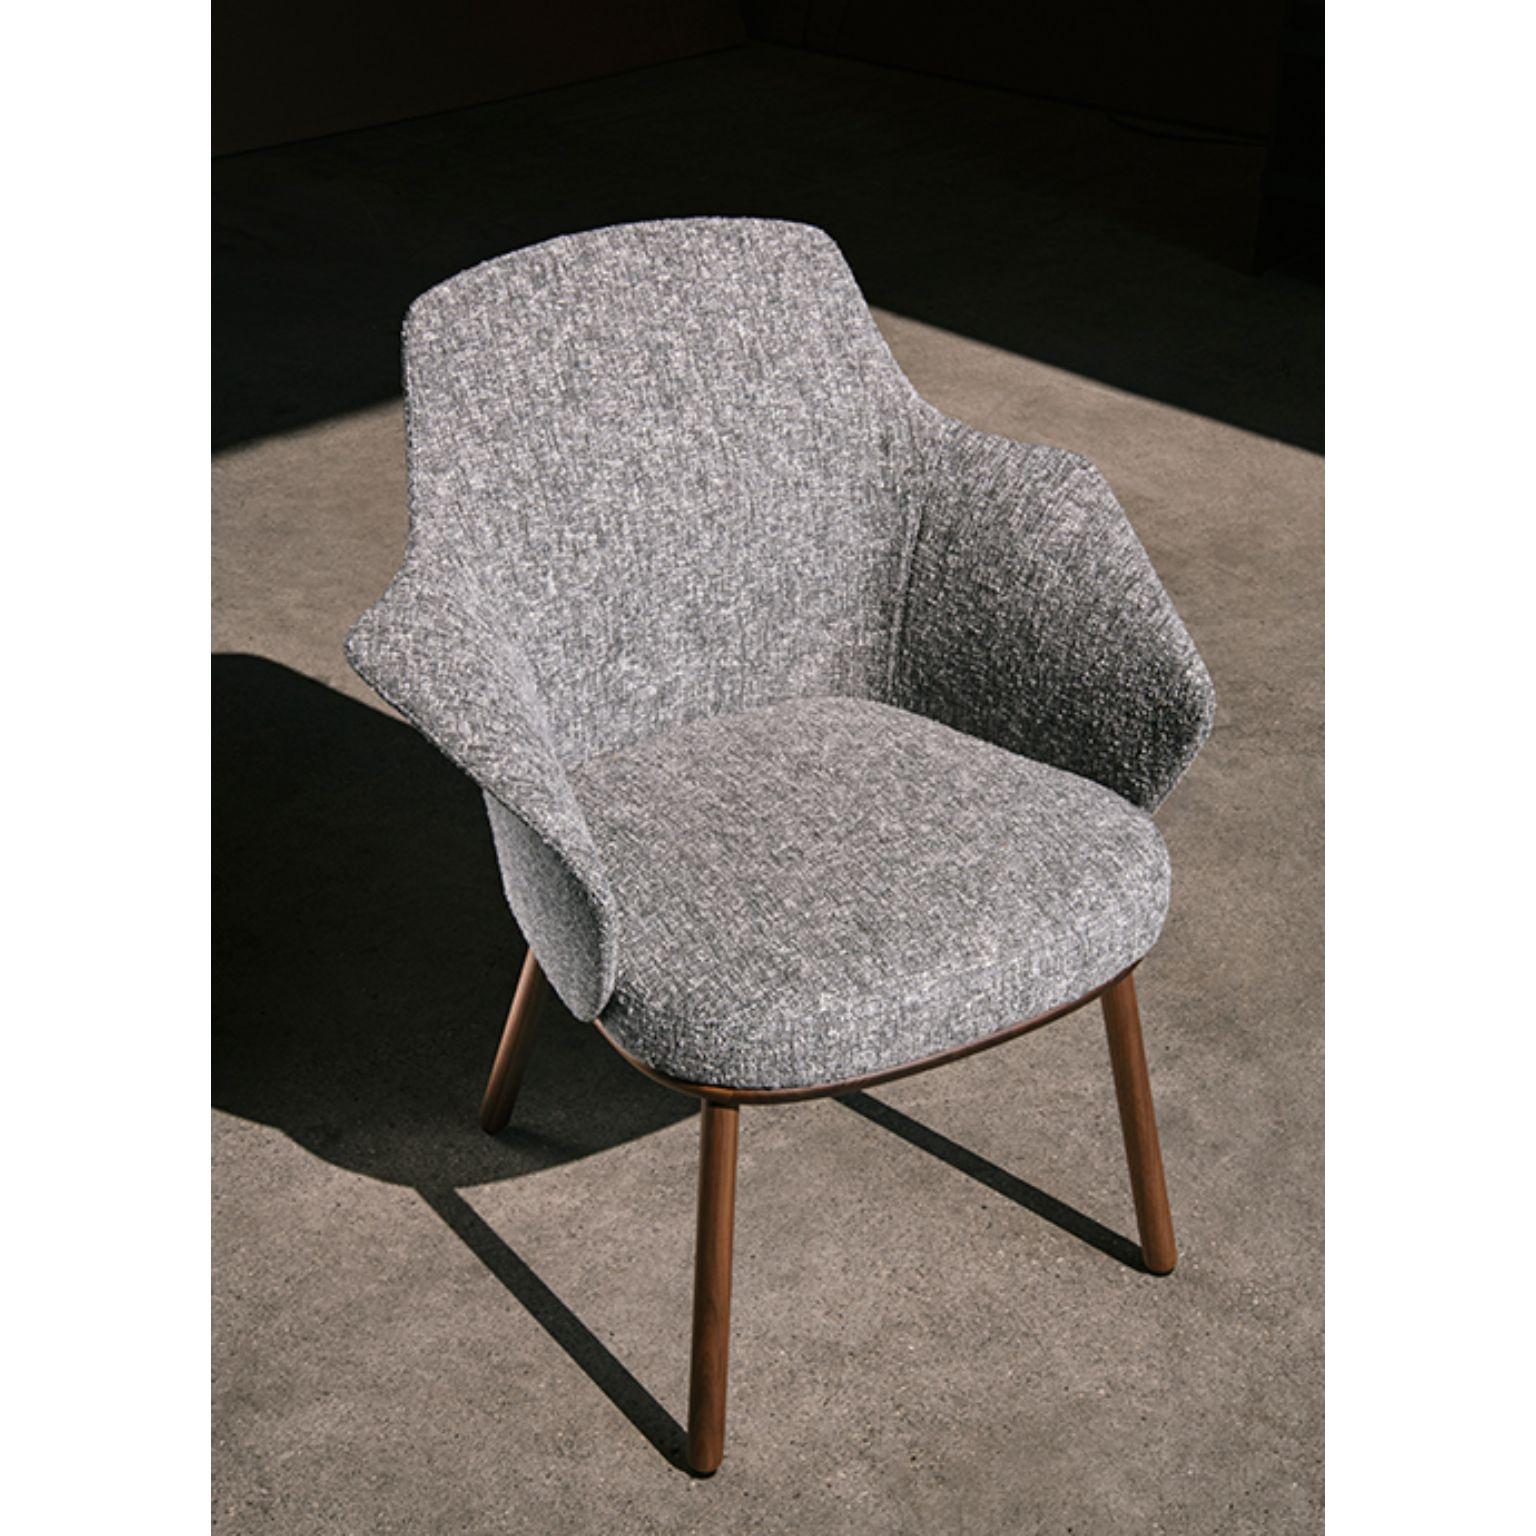 Linus armchair by Marco Dessí
Materials: Upholstery: Fabric (also available in leather)
Structure: Wood: Noce Canaletto solid wood, Coral/Dark green/Black stained wood
 Also available Metal: Black powder-coated metal, Black chrome